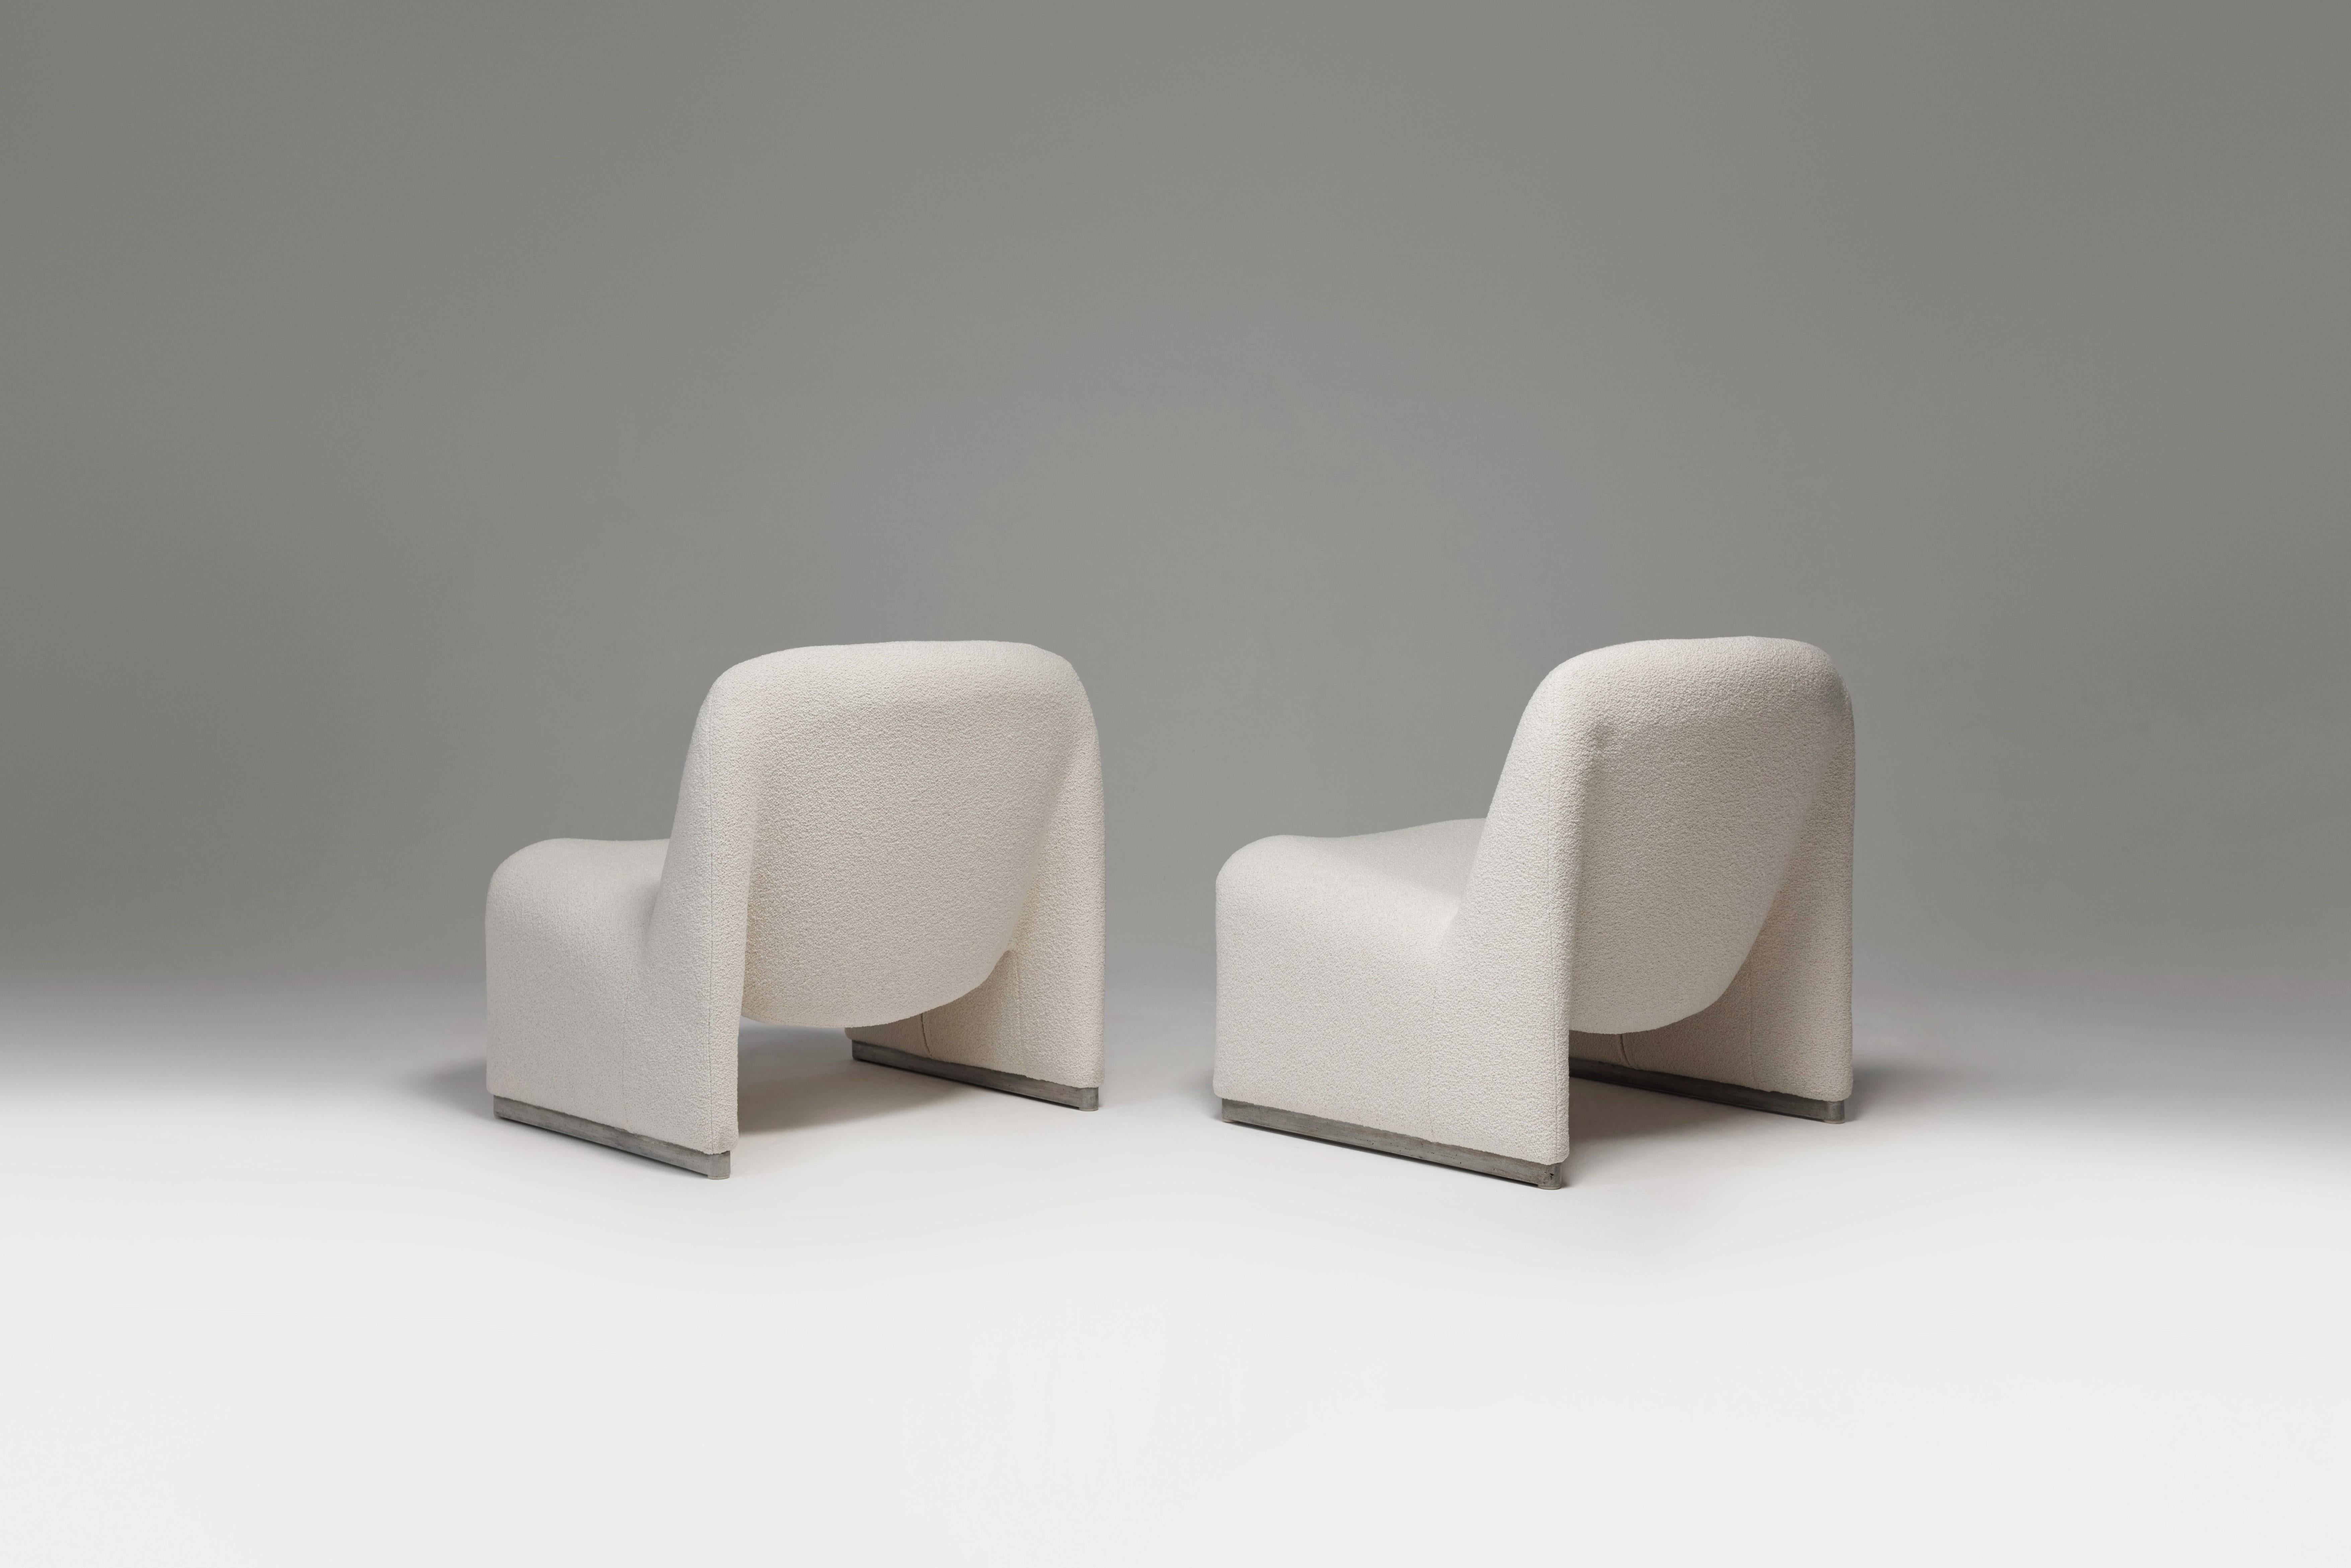 Dutch Vintage Alky Chairs in Off-White Fabric by Giancarlo Piretti for Artifort, 1970s For Sale